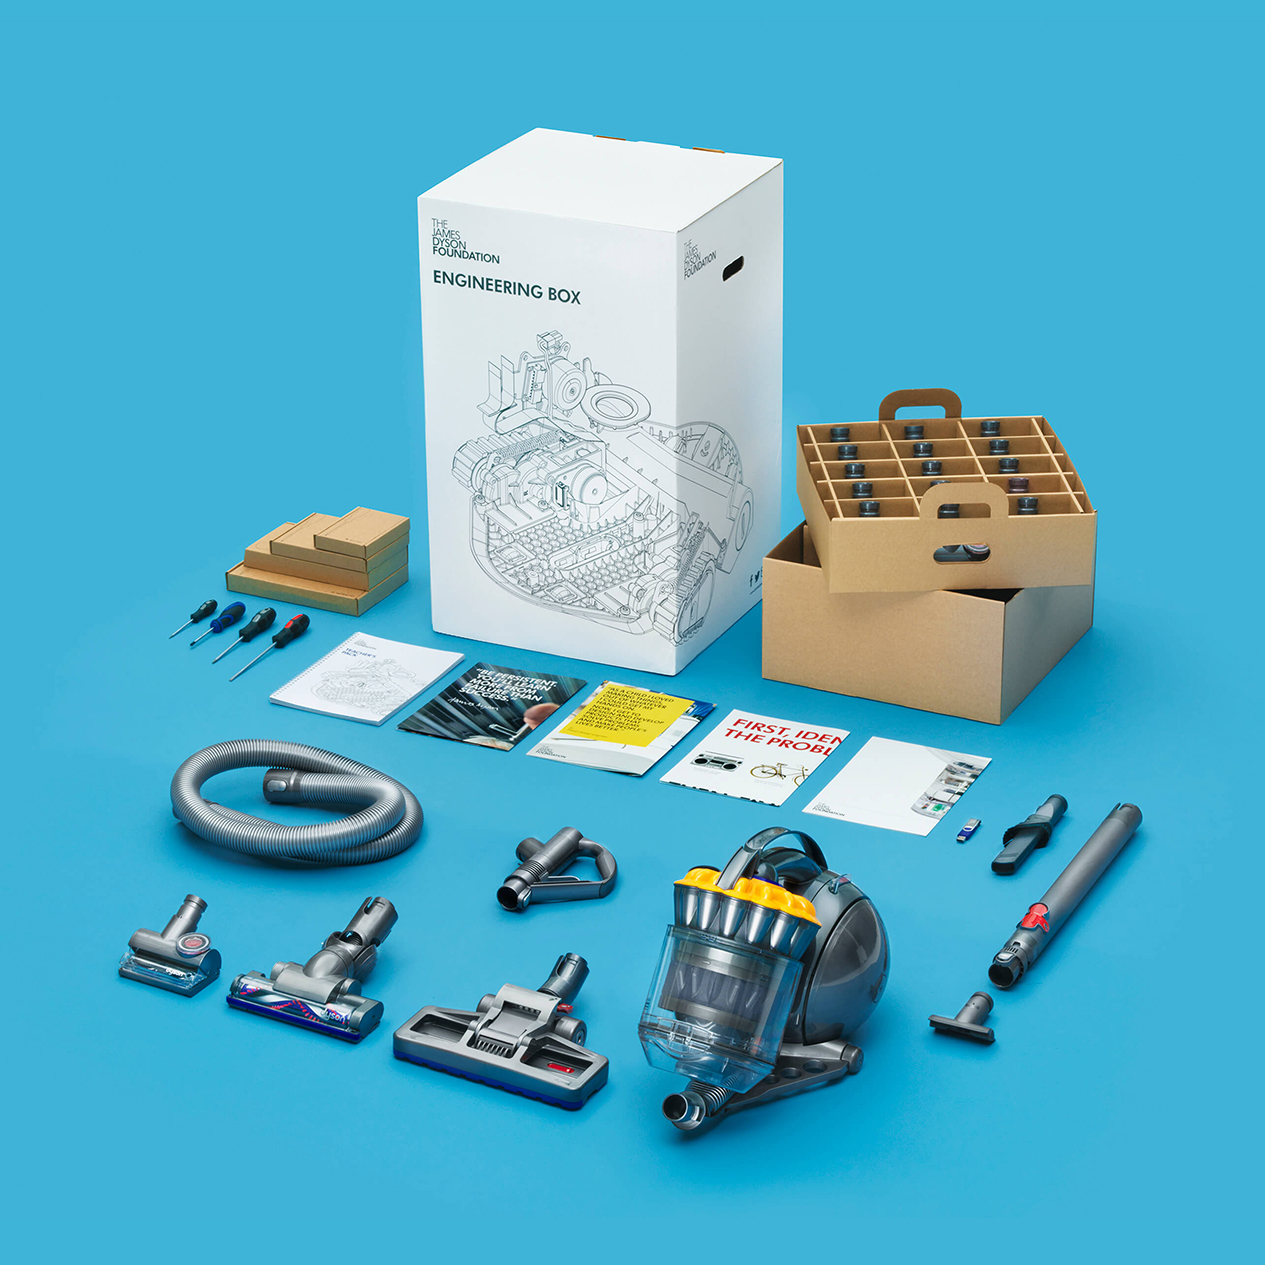 An image displaying the contents of the Engineering Box, such as posters and Dyson technology parts.